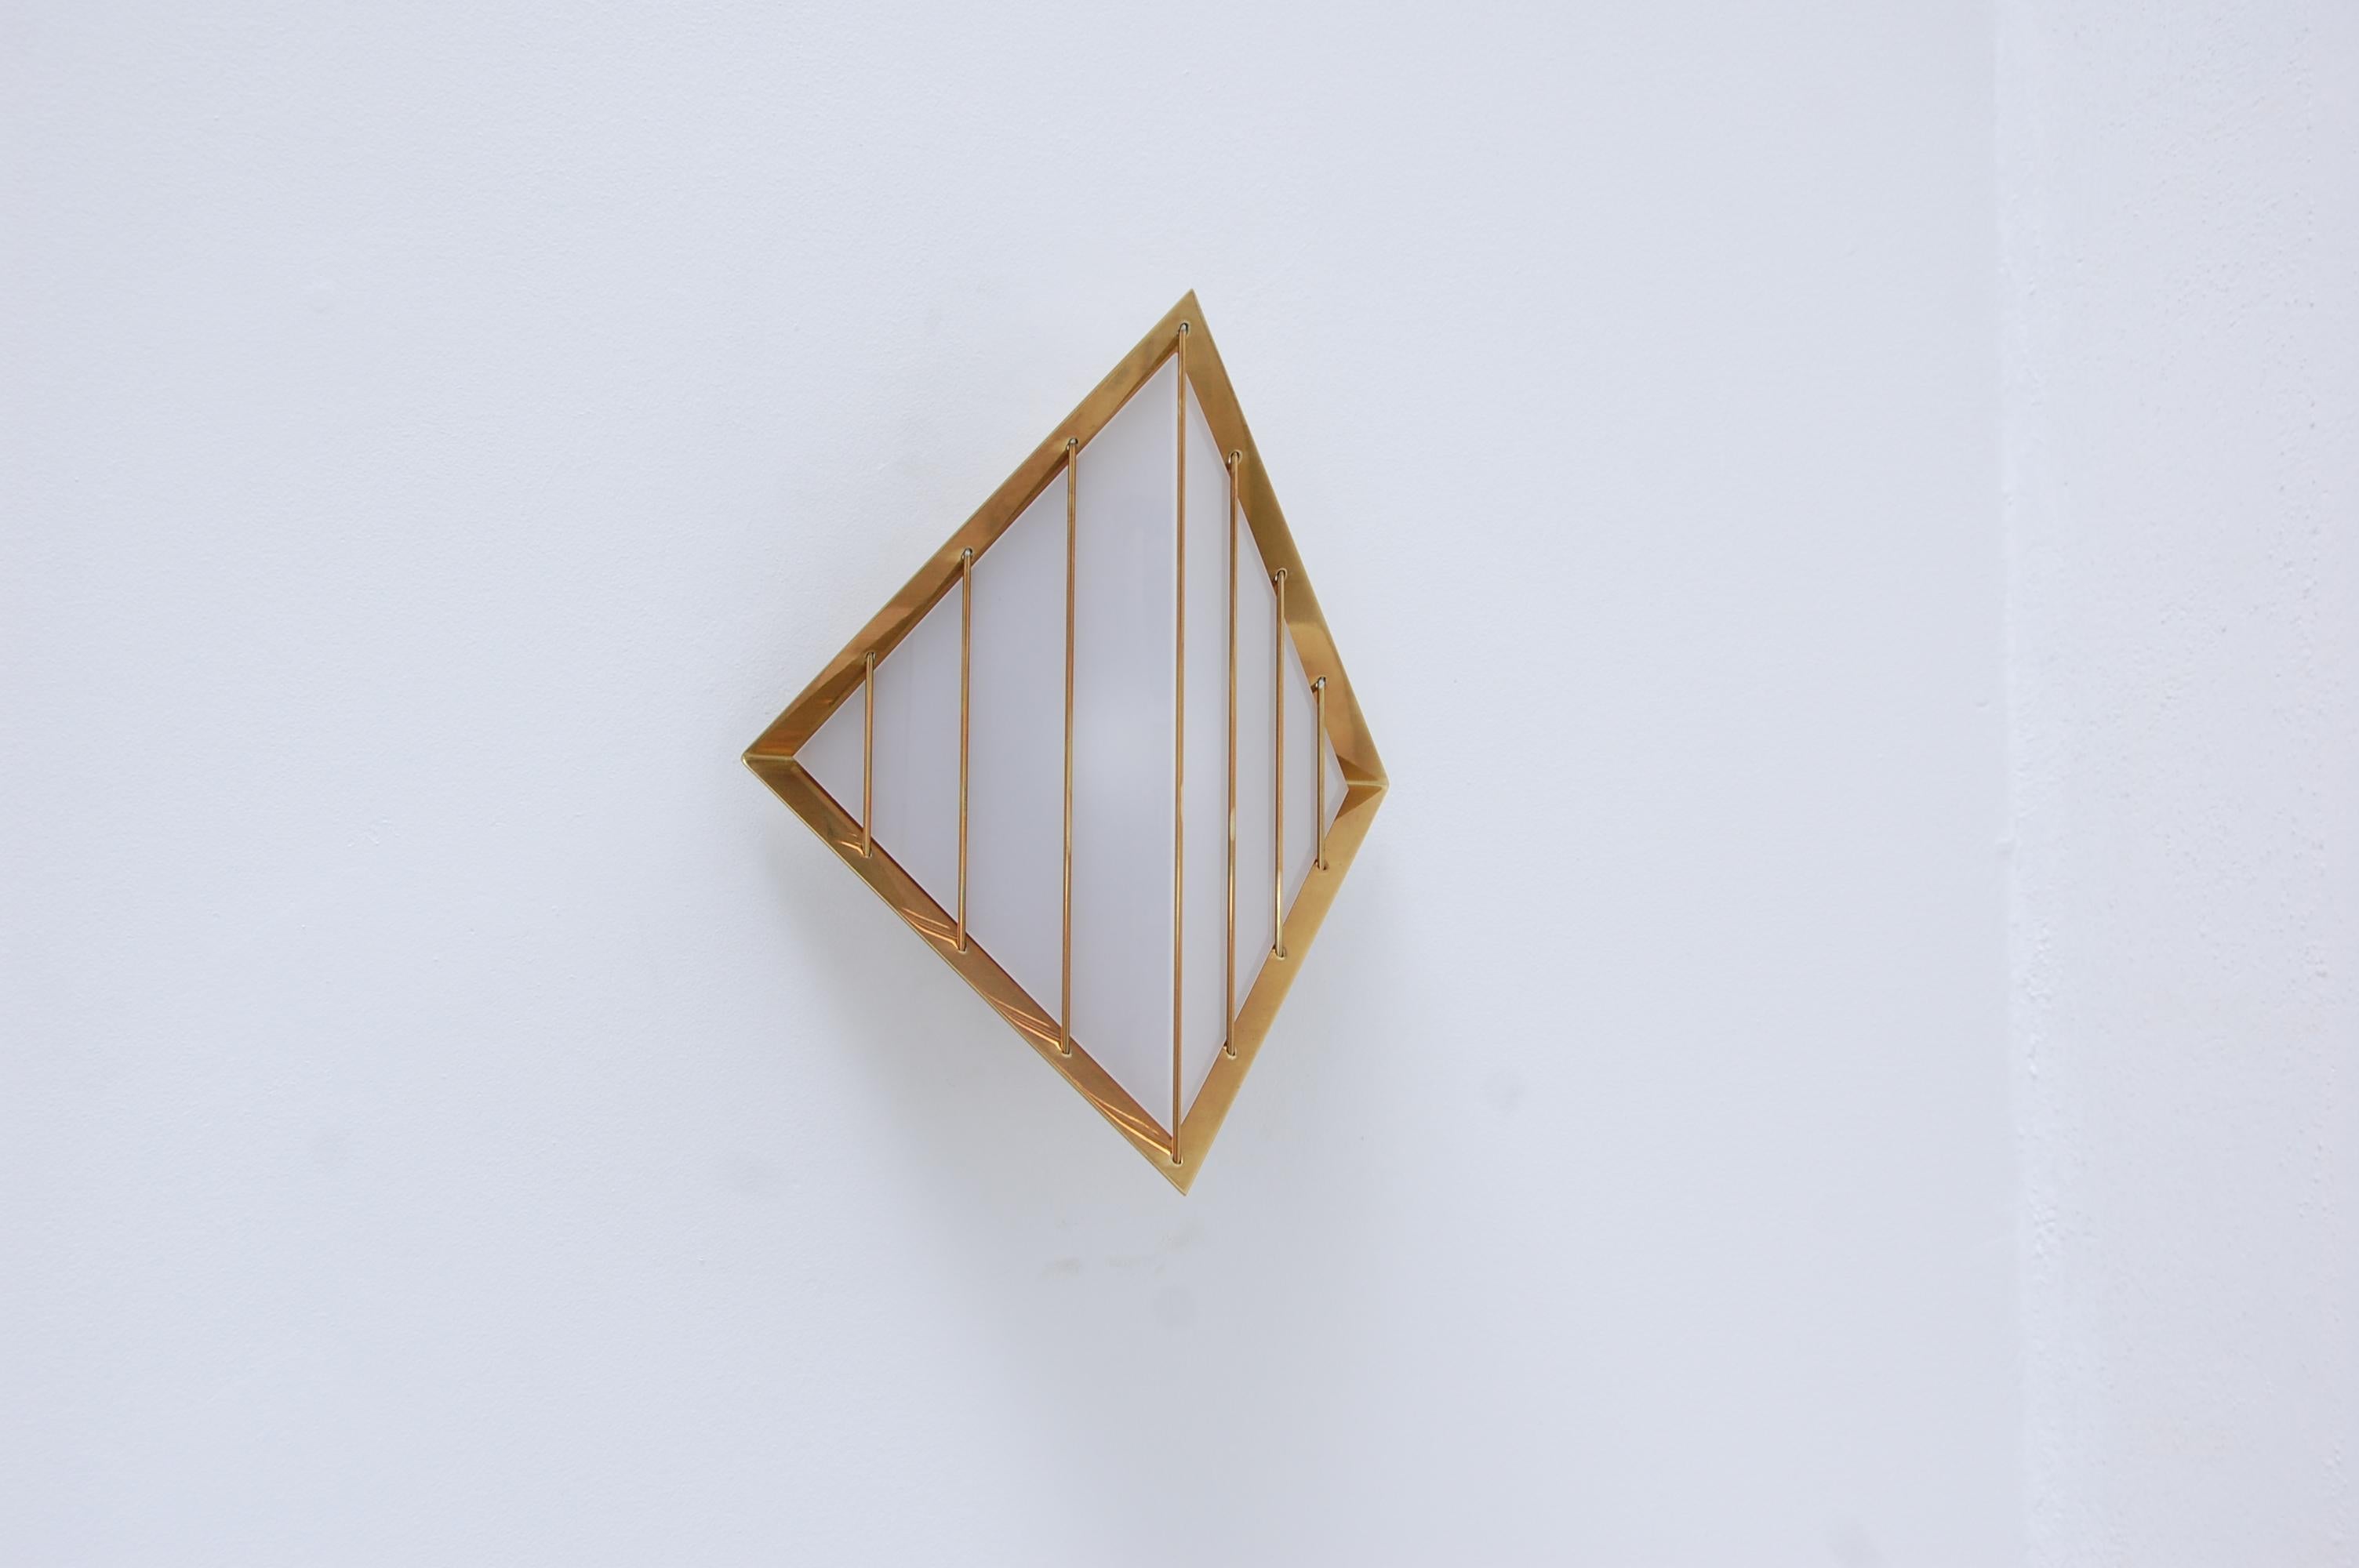 The LUdimanti Sconce is part of Lumfardo Luminaires’ contemporary lighting collection. This diamond shaped brass and acrylic sconce is made to order and can be used either indoor or outdoors. Multiples are available to order. This wall fixture has a